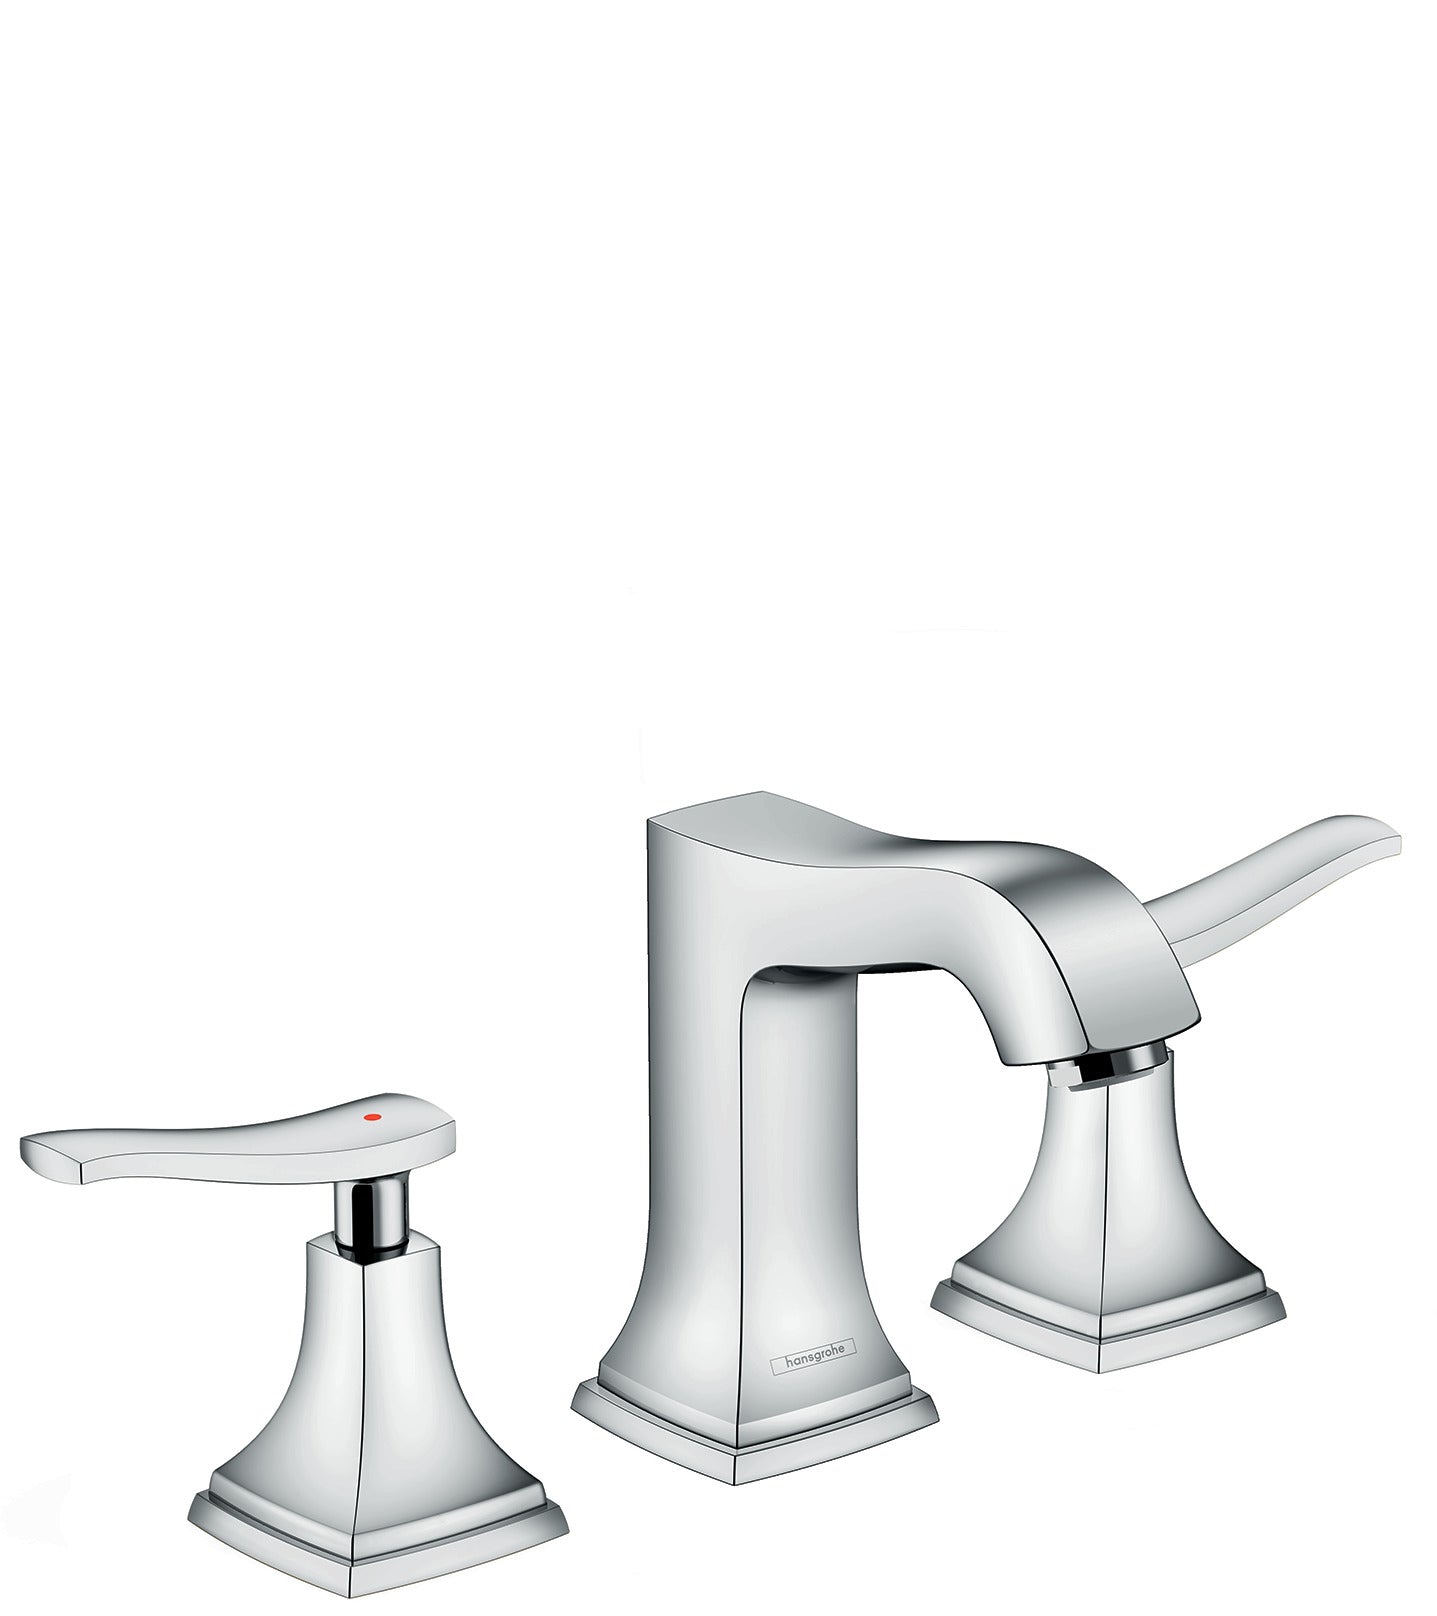 HANSGROHE 31330001 Chrome Metropol Classic Classic Widespread Bathroom Faucet 1.2 GPM